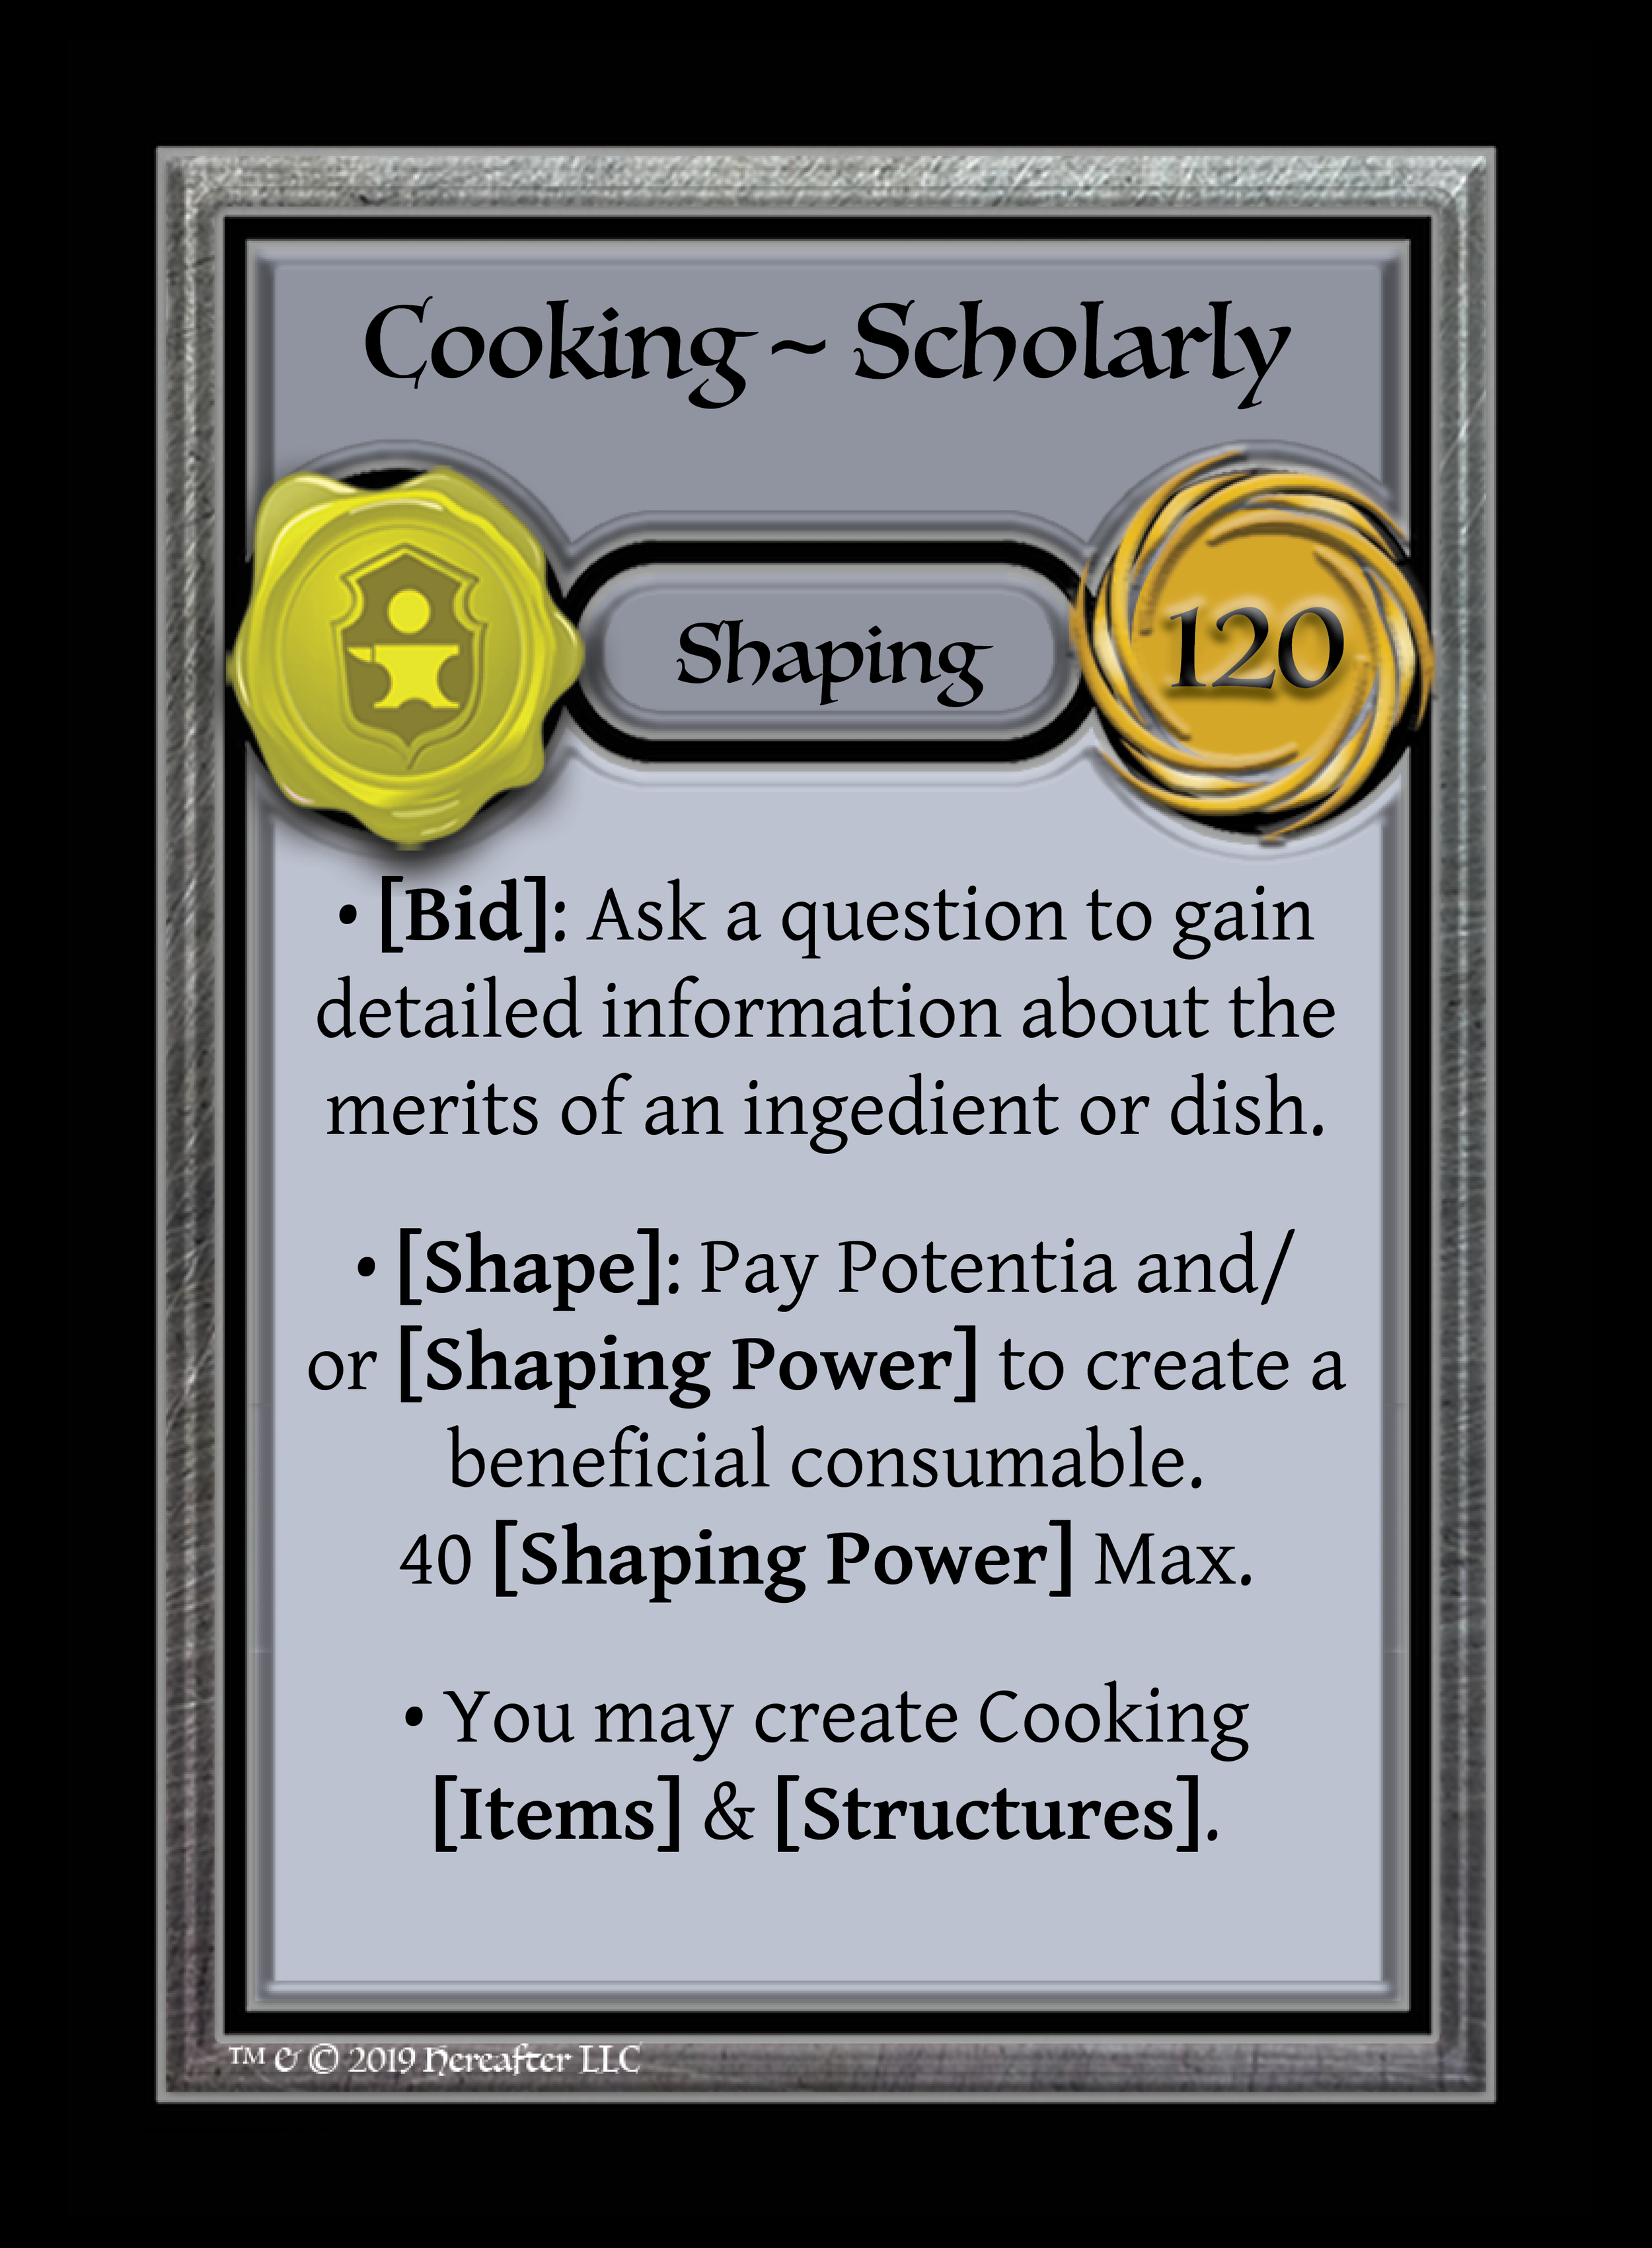 246_Shaping_Cooking ~ Scholarly_().png